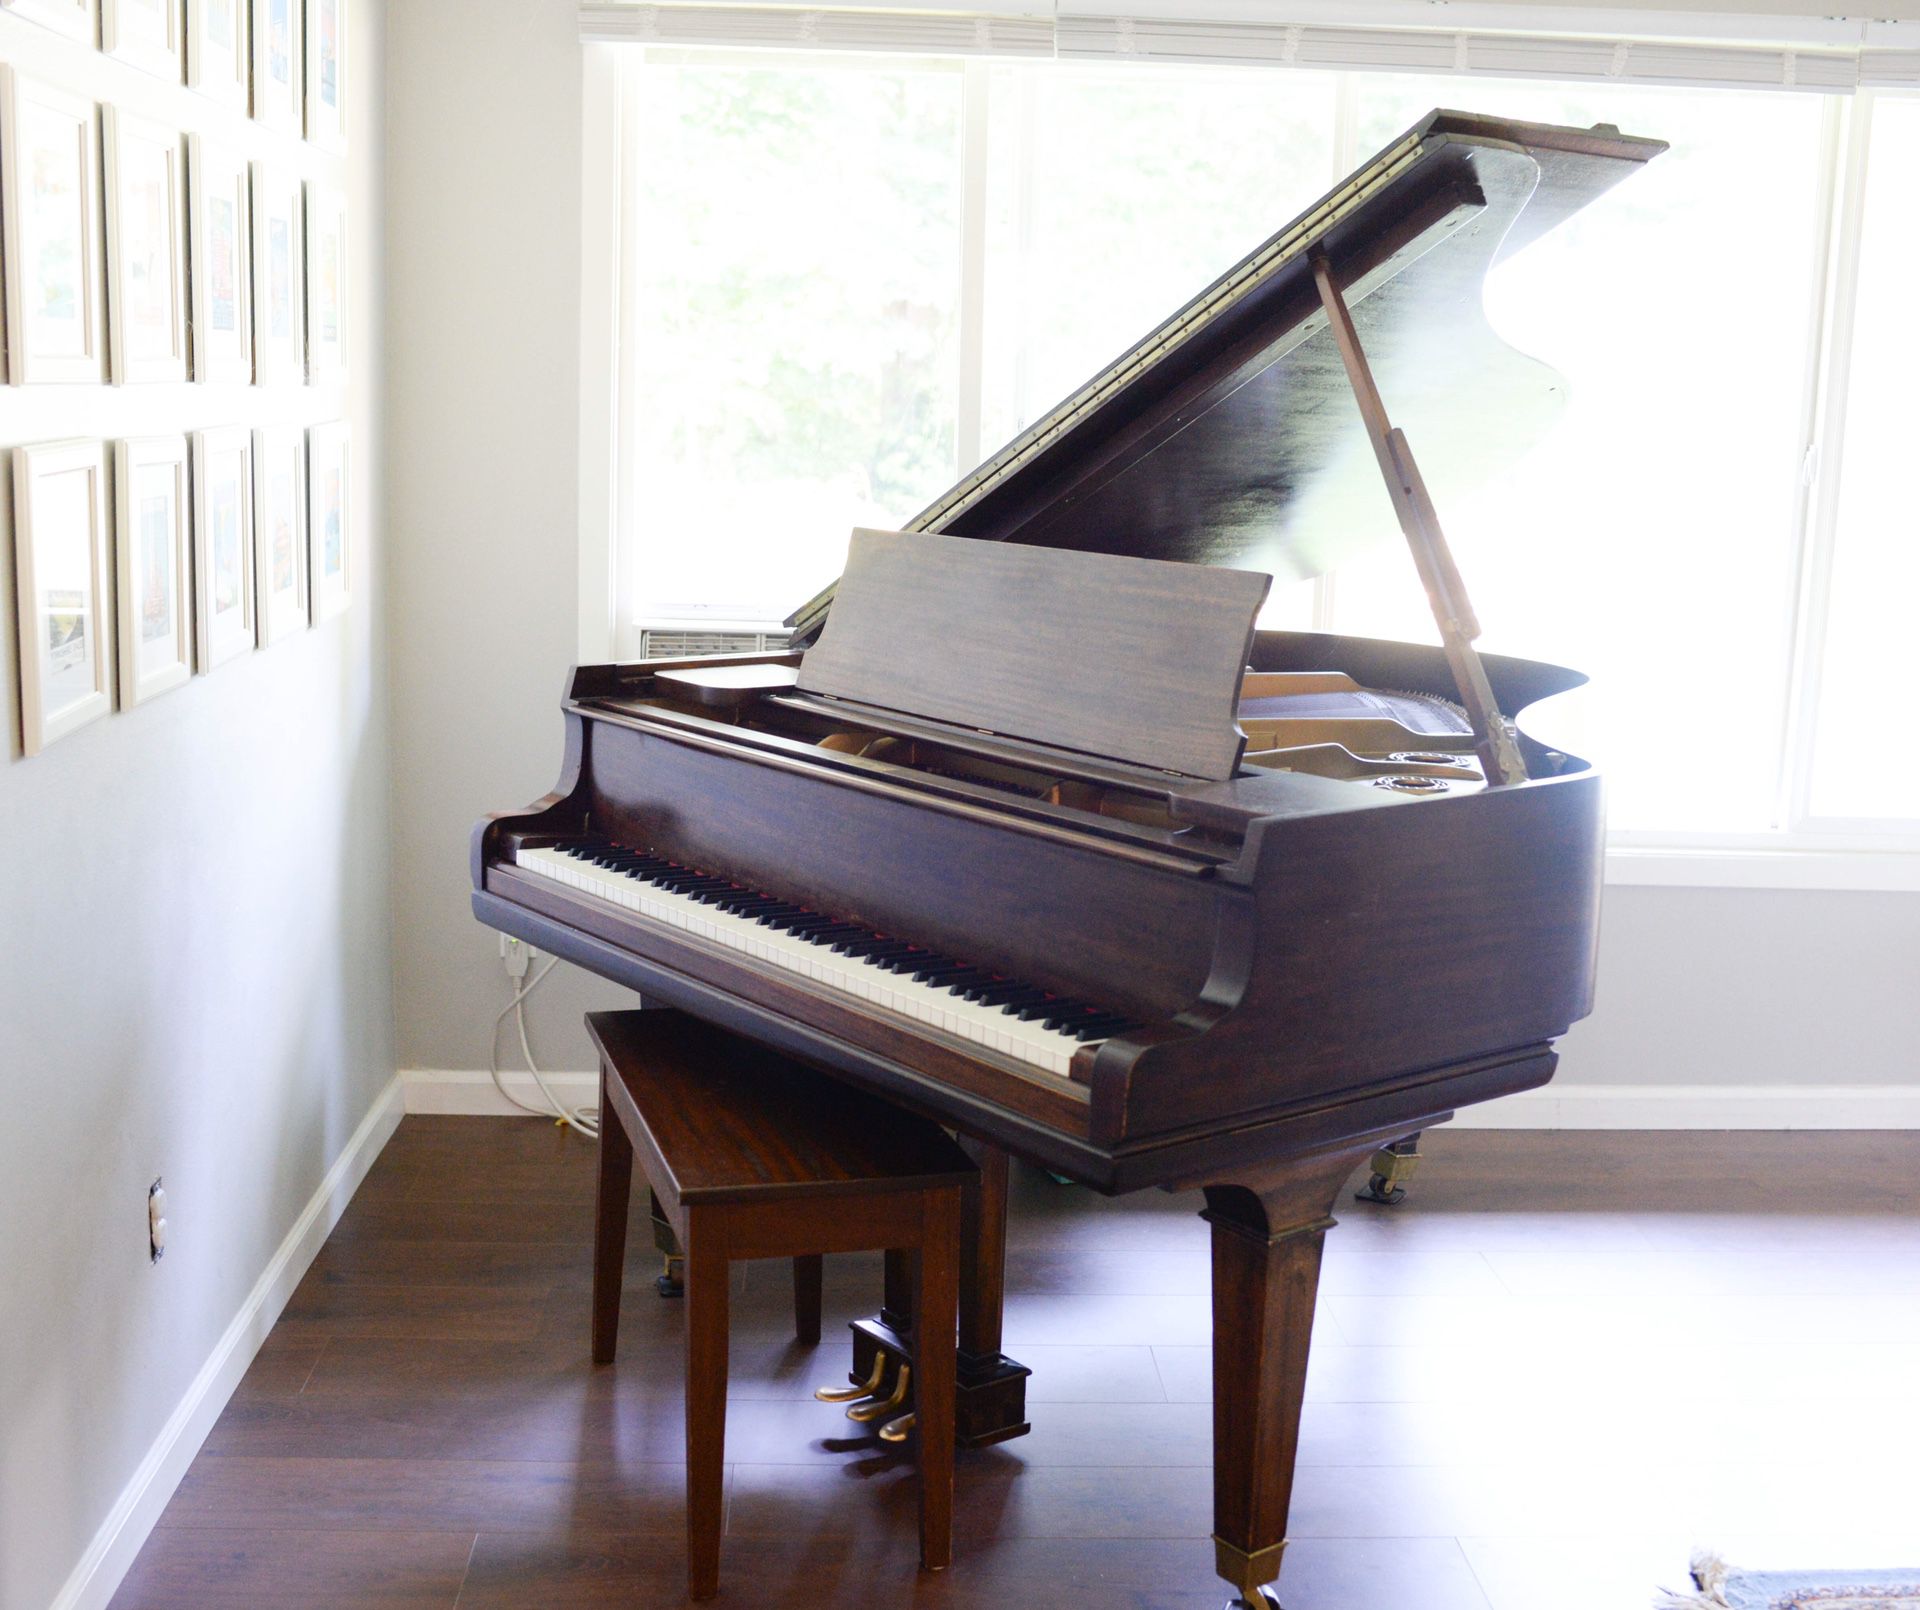 1930s Conover Baby Grand Piano (excellent shape!)